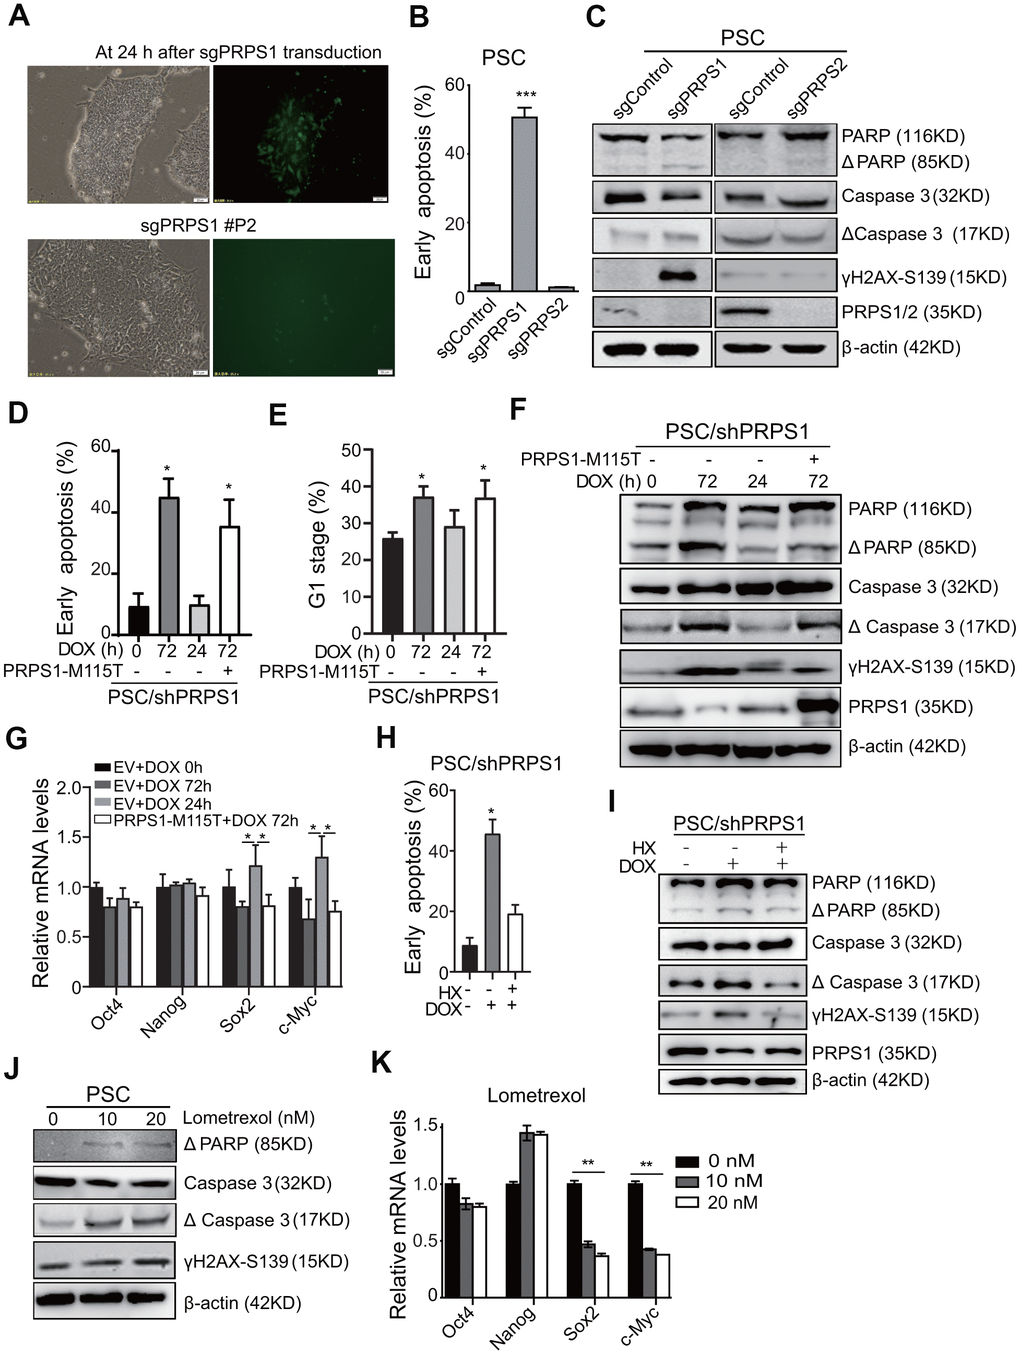 PRPS1 is critical for PSCs survival and stemness by controlling purine synthesis. (A) Representative images of cells at 24 h post sgRNA-PRPS1 lentivirus infection or at second passage (P2). Bars: 20 μm. (B) FACS analysis of cell apoptosis in PSCs at Day 3 after sgPRPS1 or sgPRPS2 lentivirus transduction. *** PC) WB of the expression of DNA damage and apoptosis marker proteins in the PSCs from (B). (D, E) FACS analysis of cell apoptosis (D) and cell cycle (E) in DOX-induced PRPS1 KD PSCs with or without ectopic expression of PRPS1 M115T mutant. DOX was added for 0h, 72h, or 24 h to induce PRPS1 KD. At 24 h, DOX were removed to rescue PRPS1 expression. PRPS1-M115T mutant, an enzymatically inactive PRPS1 mutant. (F) WB of the expression of DNA damage and apoptosis marker proteins in the PSCs from (D). (G) qRT-PCR analysis of the expression levels of pluripotency genes in the PSCs from (D). (H) FACS analysis of cell apoptosis in response to HX treatment based on PRPS1 KD. (I) WB of the expression of DNA damage and apoptosis marker proteins in response to HX treatment based on PRPS1 KD. (J) WB of the expression of DNA damage and apoptosis marker proteins in response to Gart inhibitor, lometrexol, treatment. (K) qRT-PCR analysis of the expression levels of pluripotency genes in the PSCs from (J). In (B, D, E, G, H and K), data are expressed as the mean ± SD. *P P t-test. Data are representative of three independent experiments with similar results.